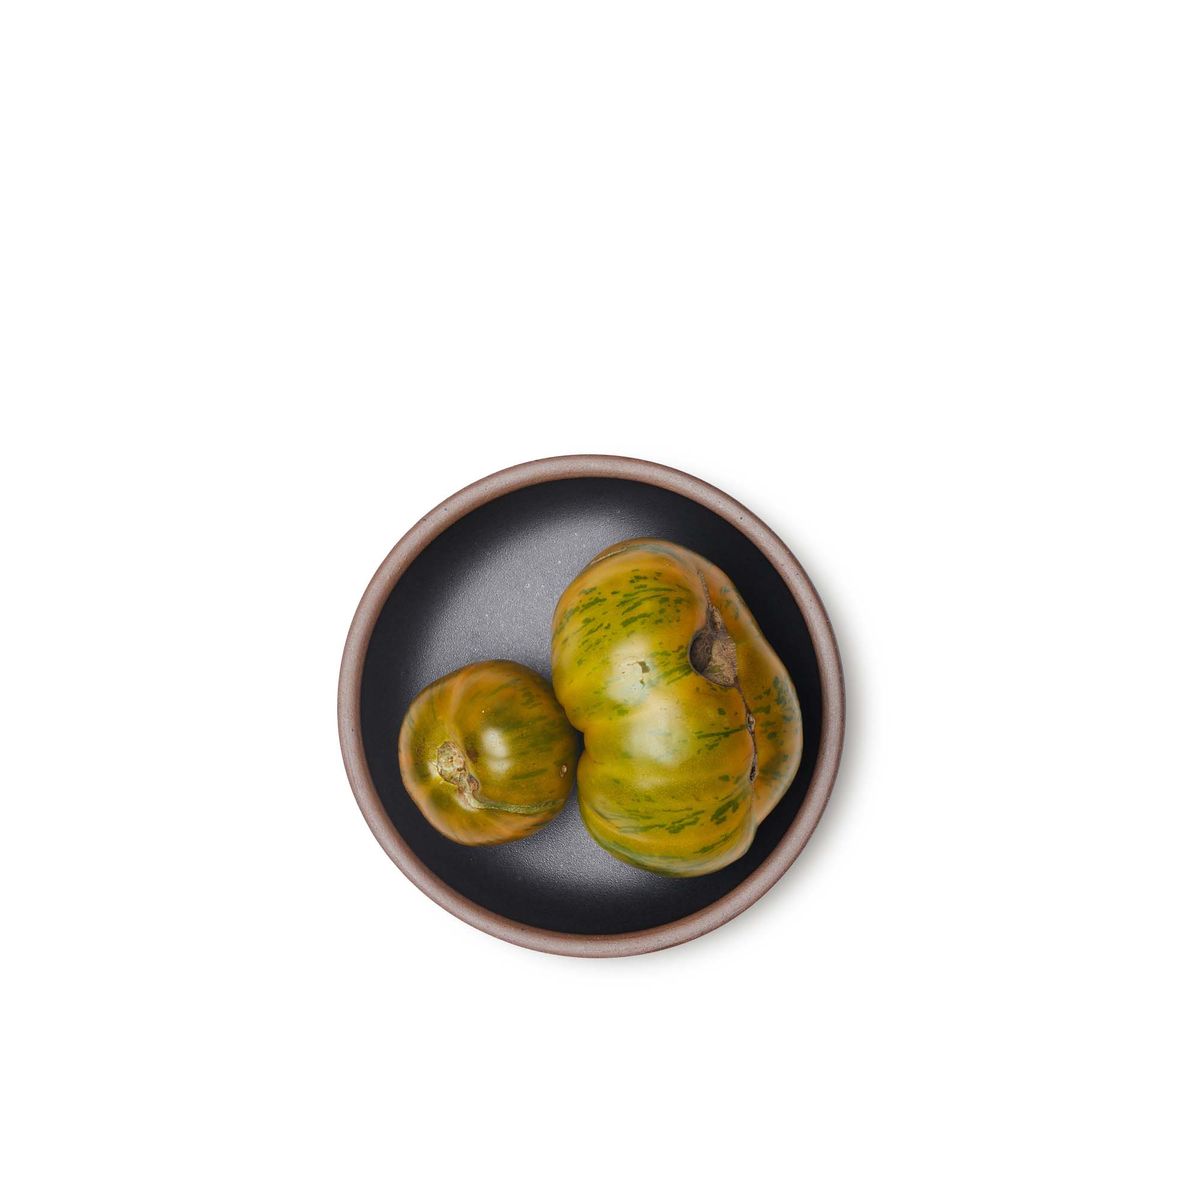 Tomatoes on a dessert sized ceramic plate in a graphite black color featuring iron speckles and an unglazed rim.